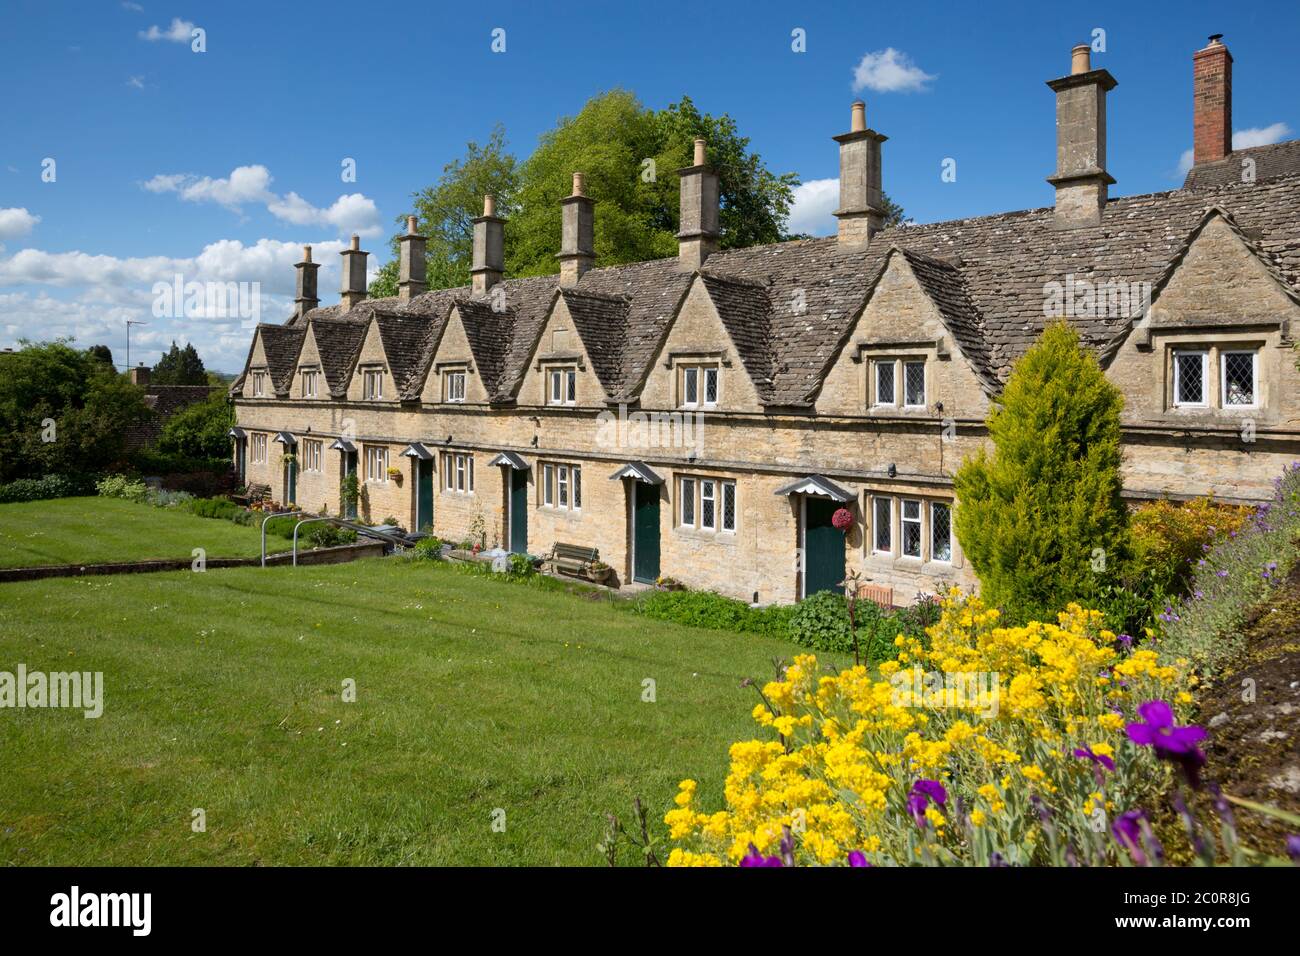 Almshouses on Church Street, Chipping Norton, Cotswolds, Oxfordshire, England, United Kingdom, Europe Stock Photo